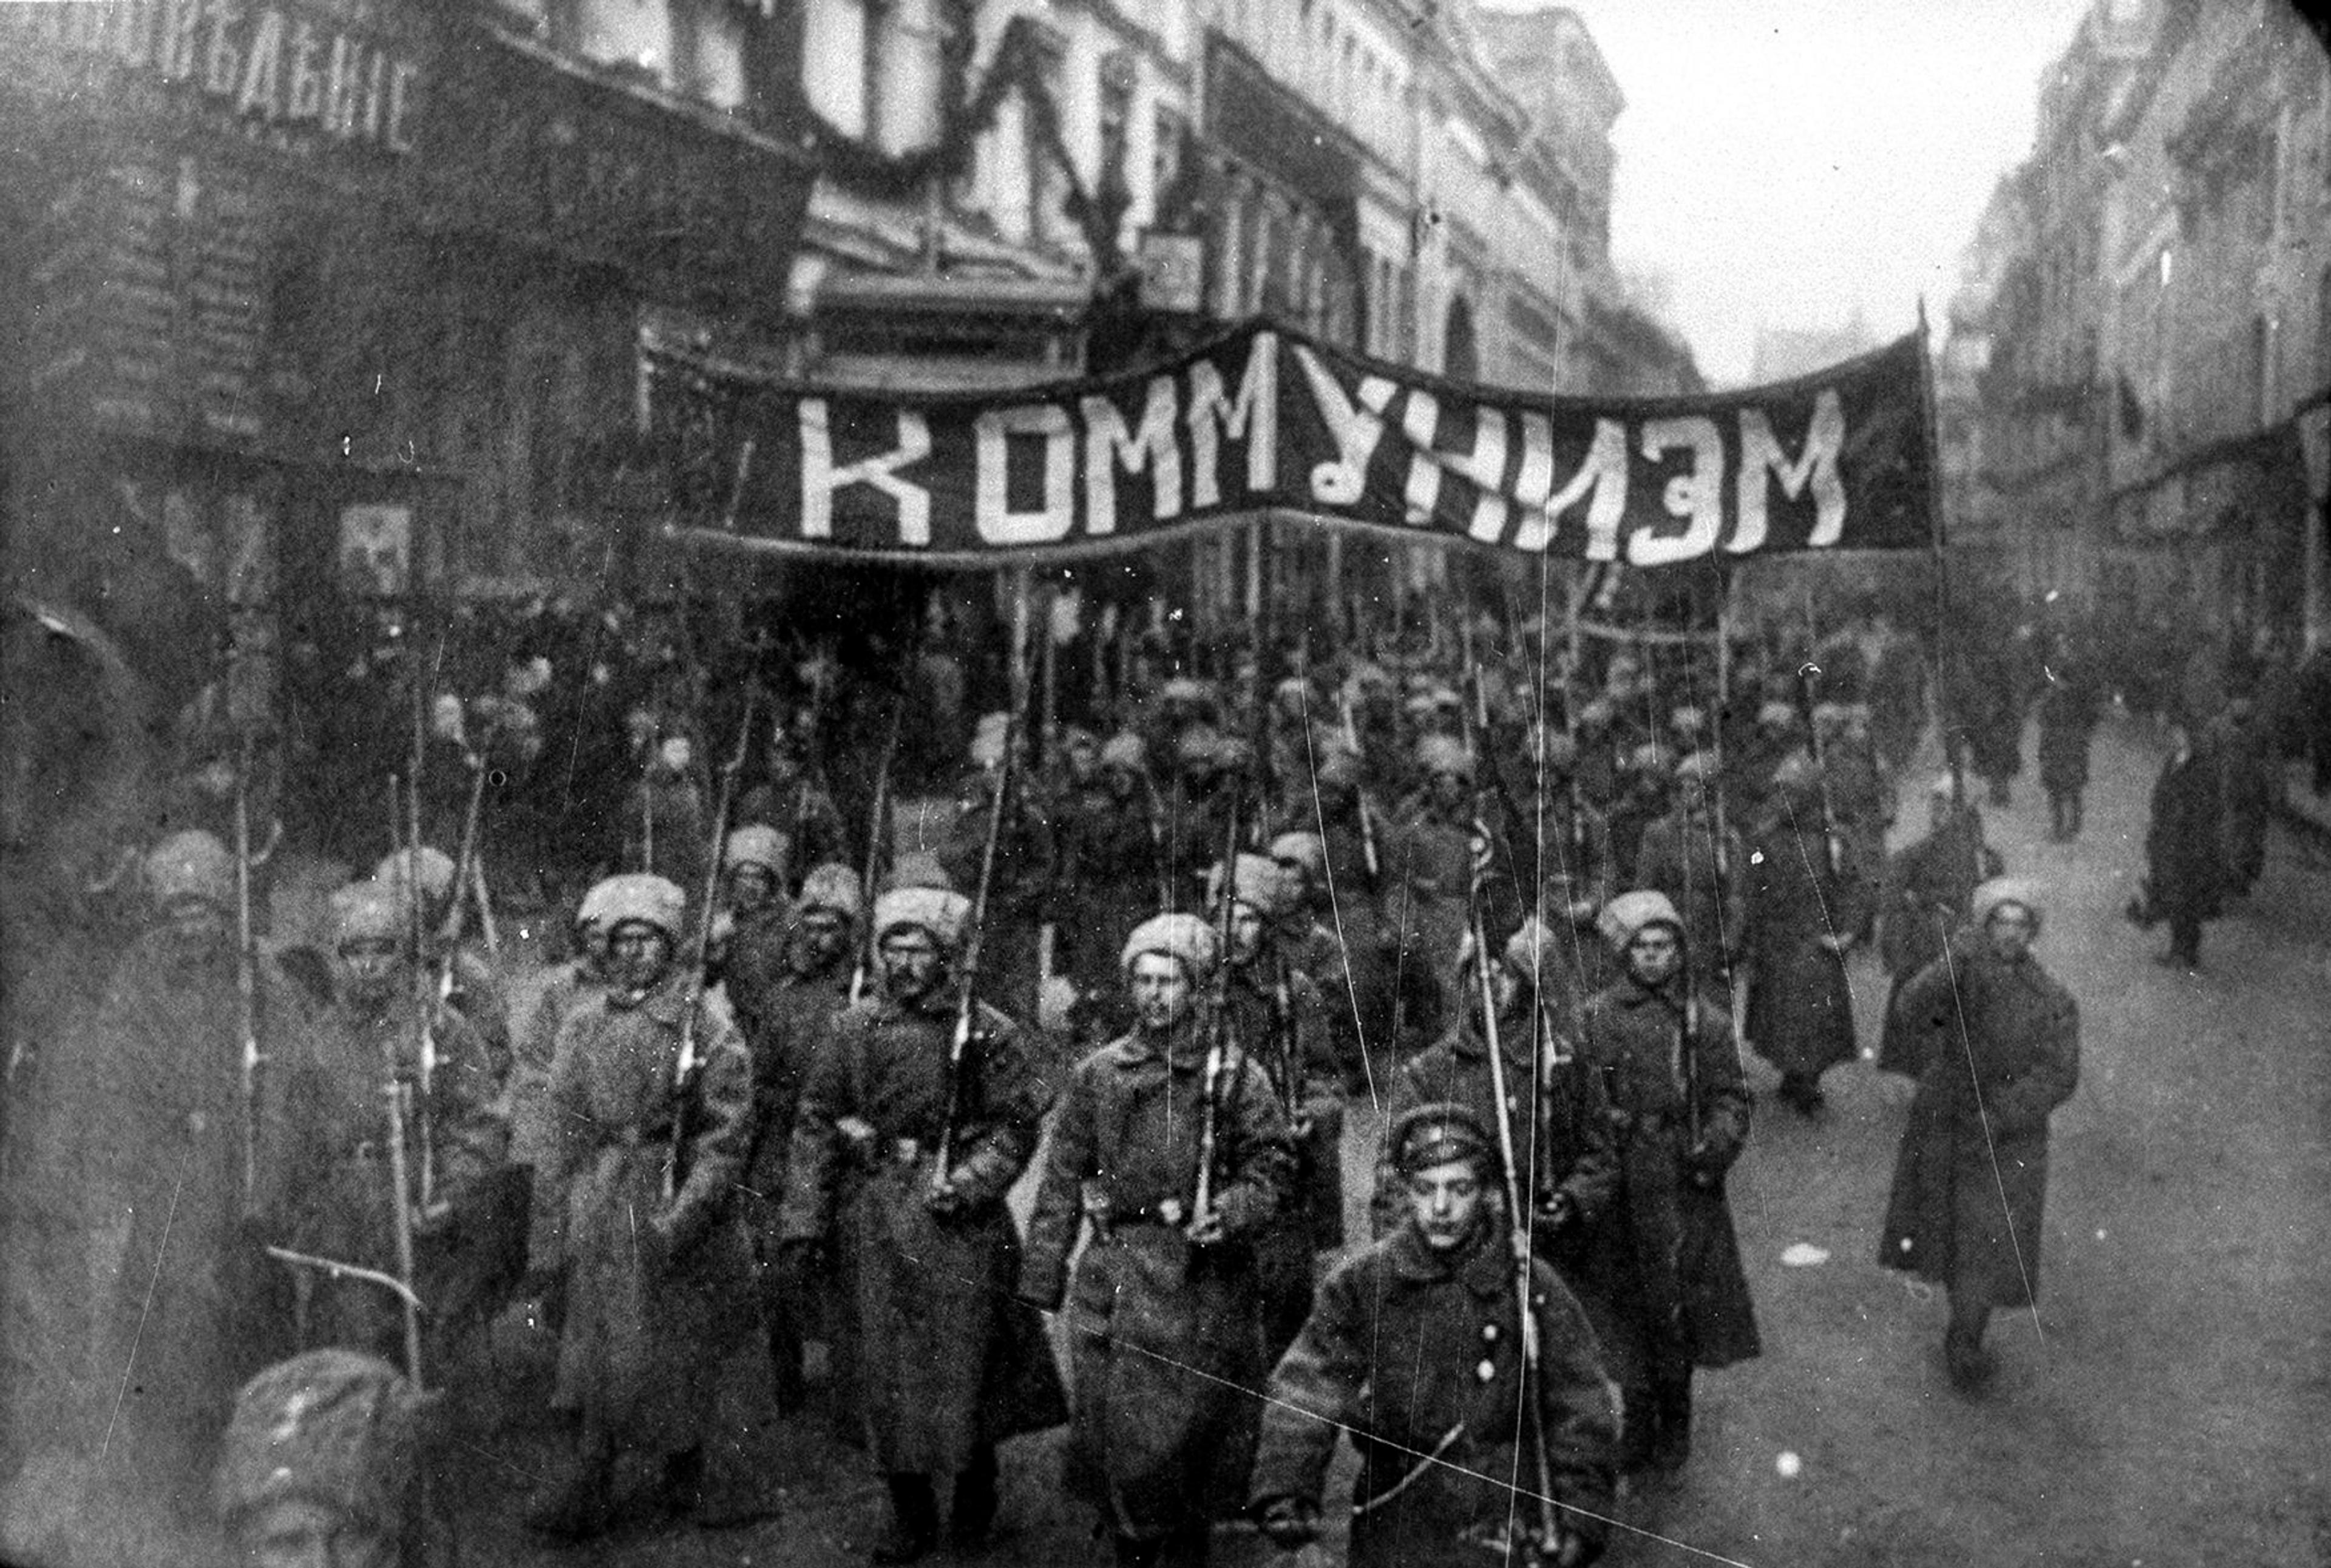 <p>Armed soldiers carry a banner reading ‘Communism’ in Nikolskaya street, Moscow, October 1917. <em>Courtesy Wikipedia</em></p>